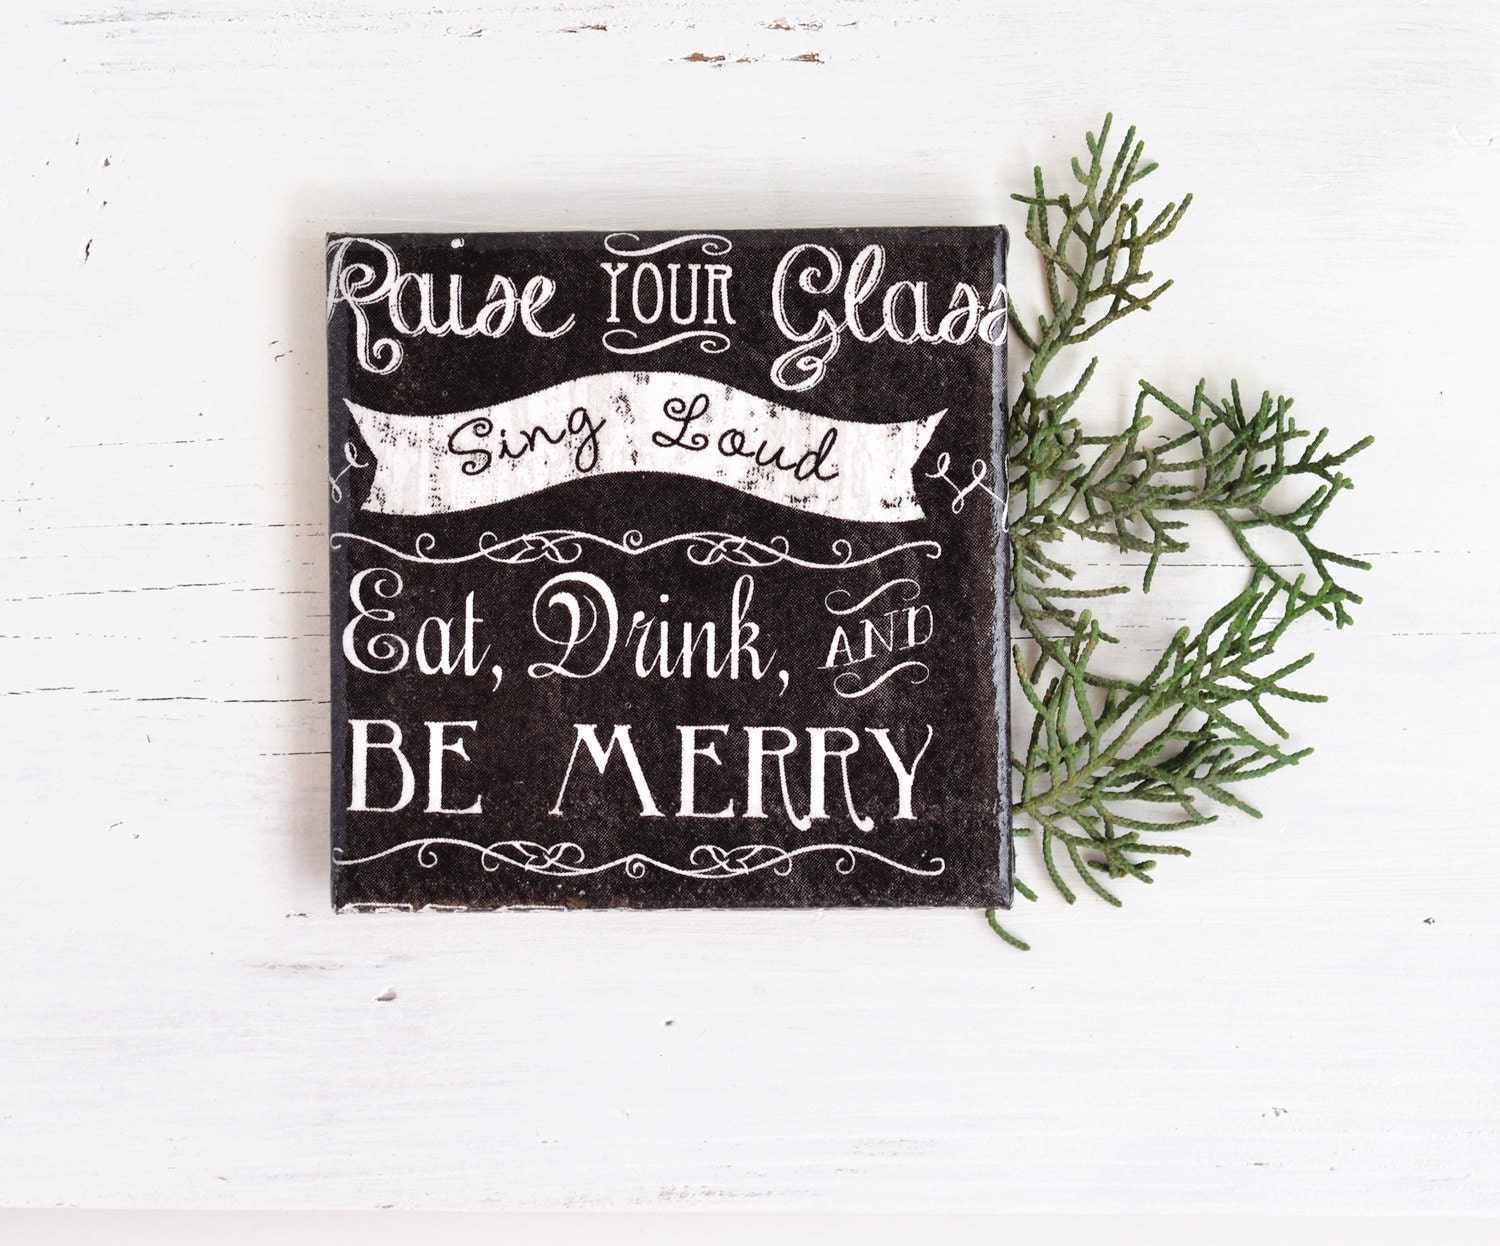 Chalkboard Style Merry Wishes Ceramic Tile Coasters Typography Black Drink Coasters Christmas New Year Hostess Gift, set of 4 - Tilissimo